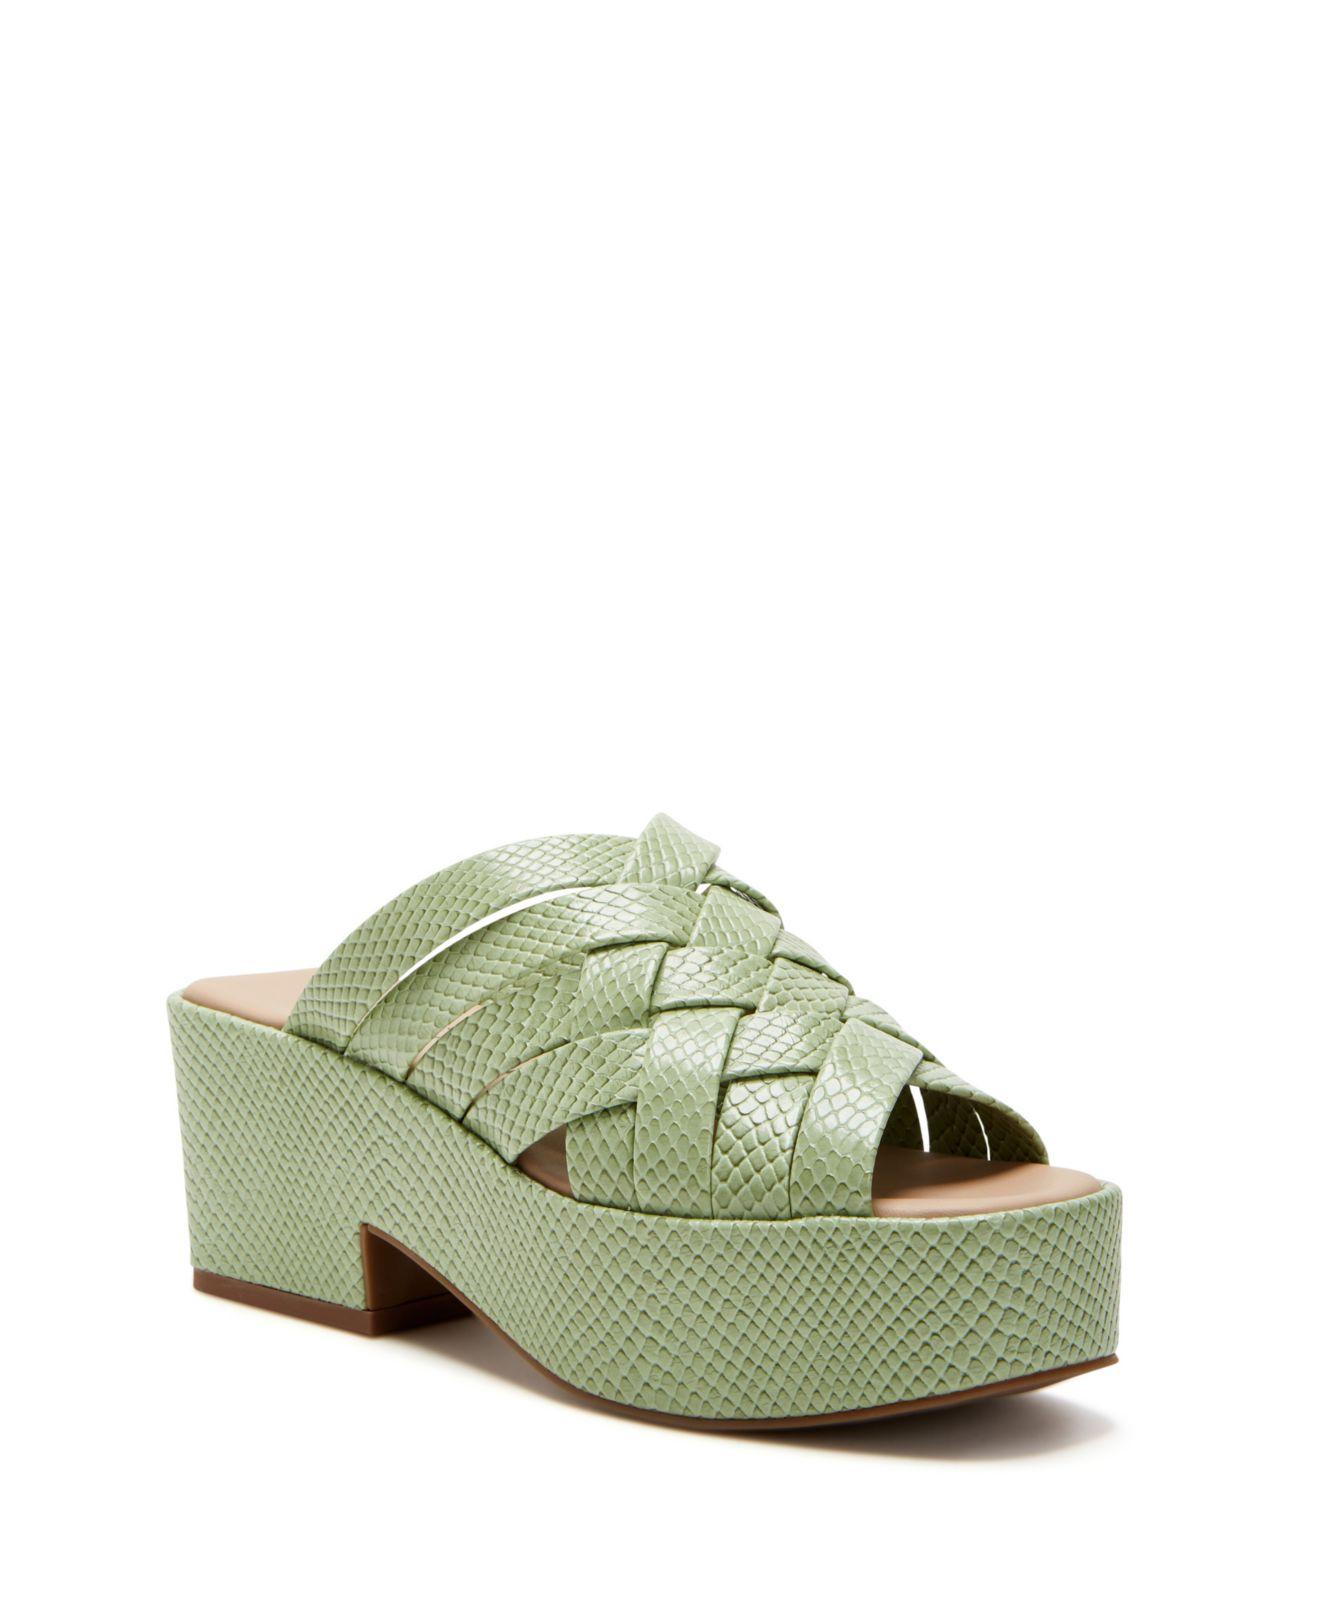 Katy Perry The Busy Bee Criss Cross Slide Sandal in Green | Lyst